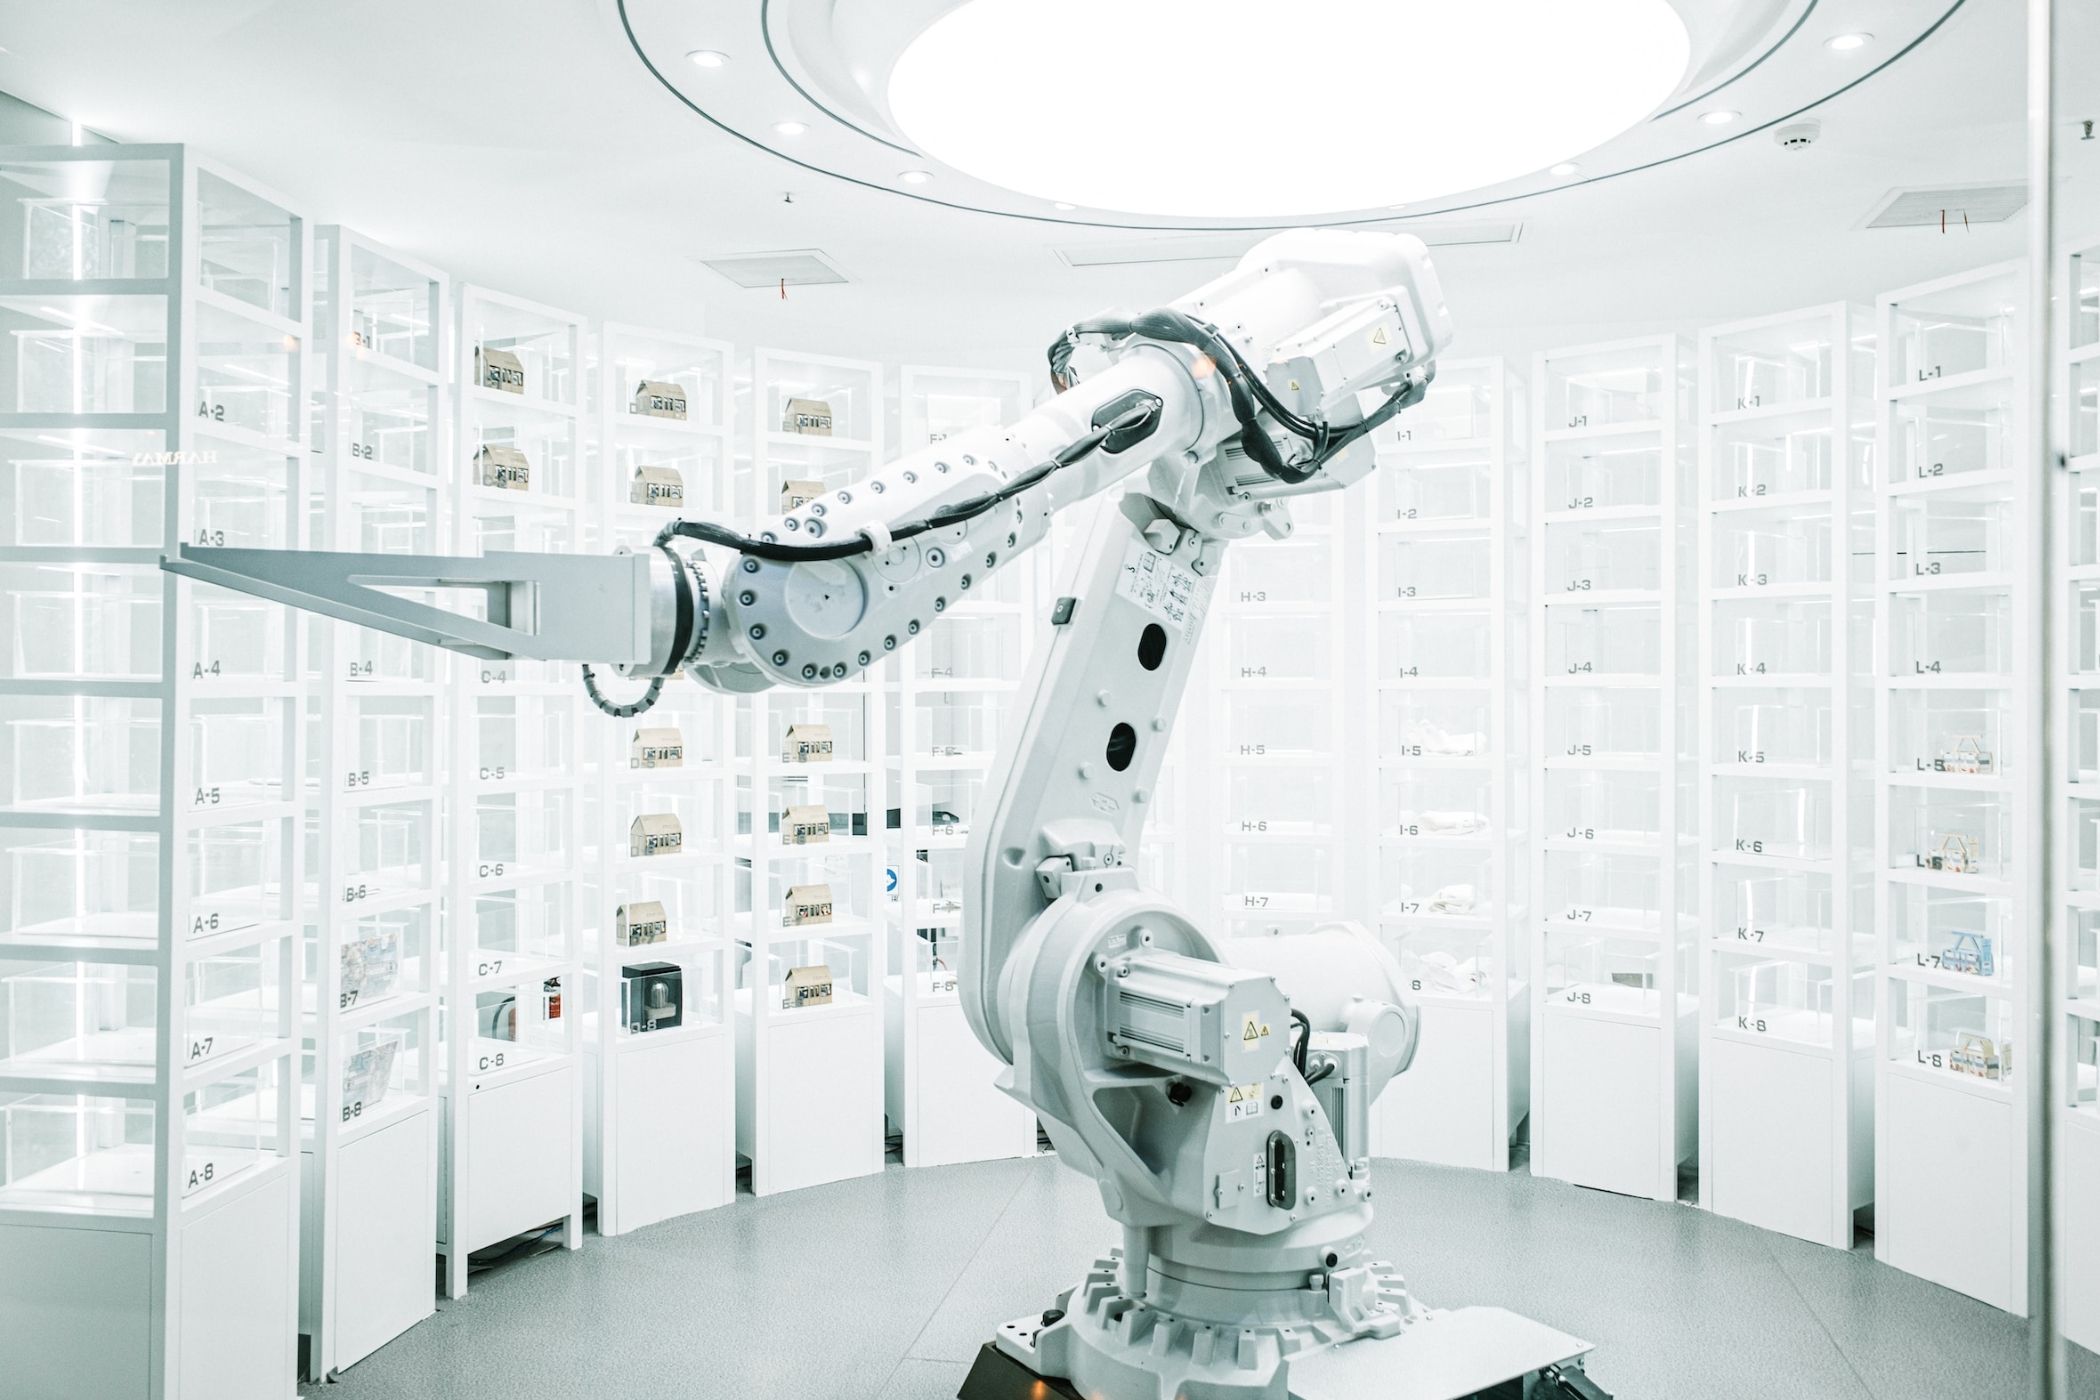 A futuristic, brightly-lit white room with a robotic machine